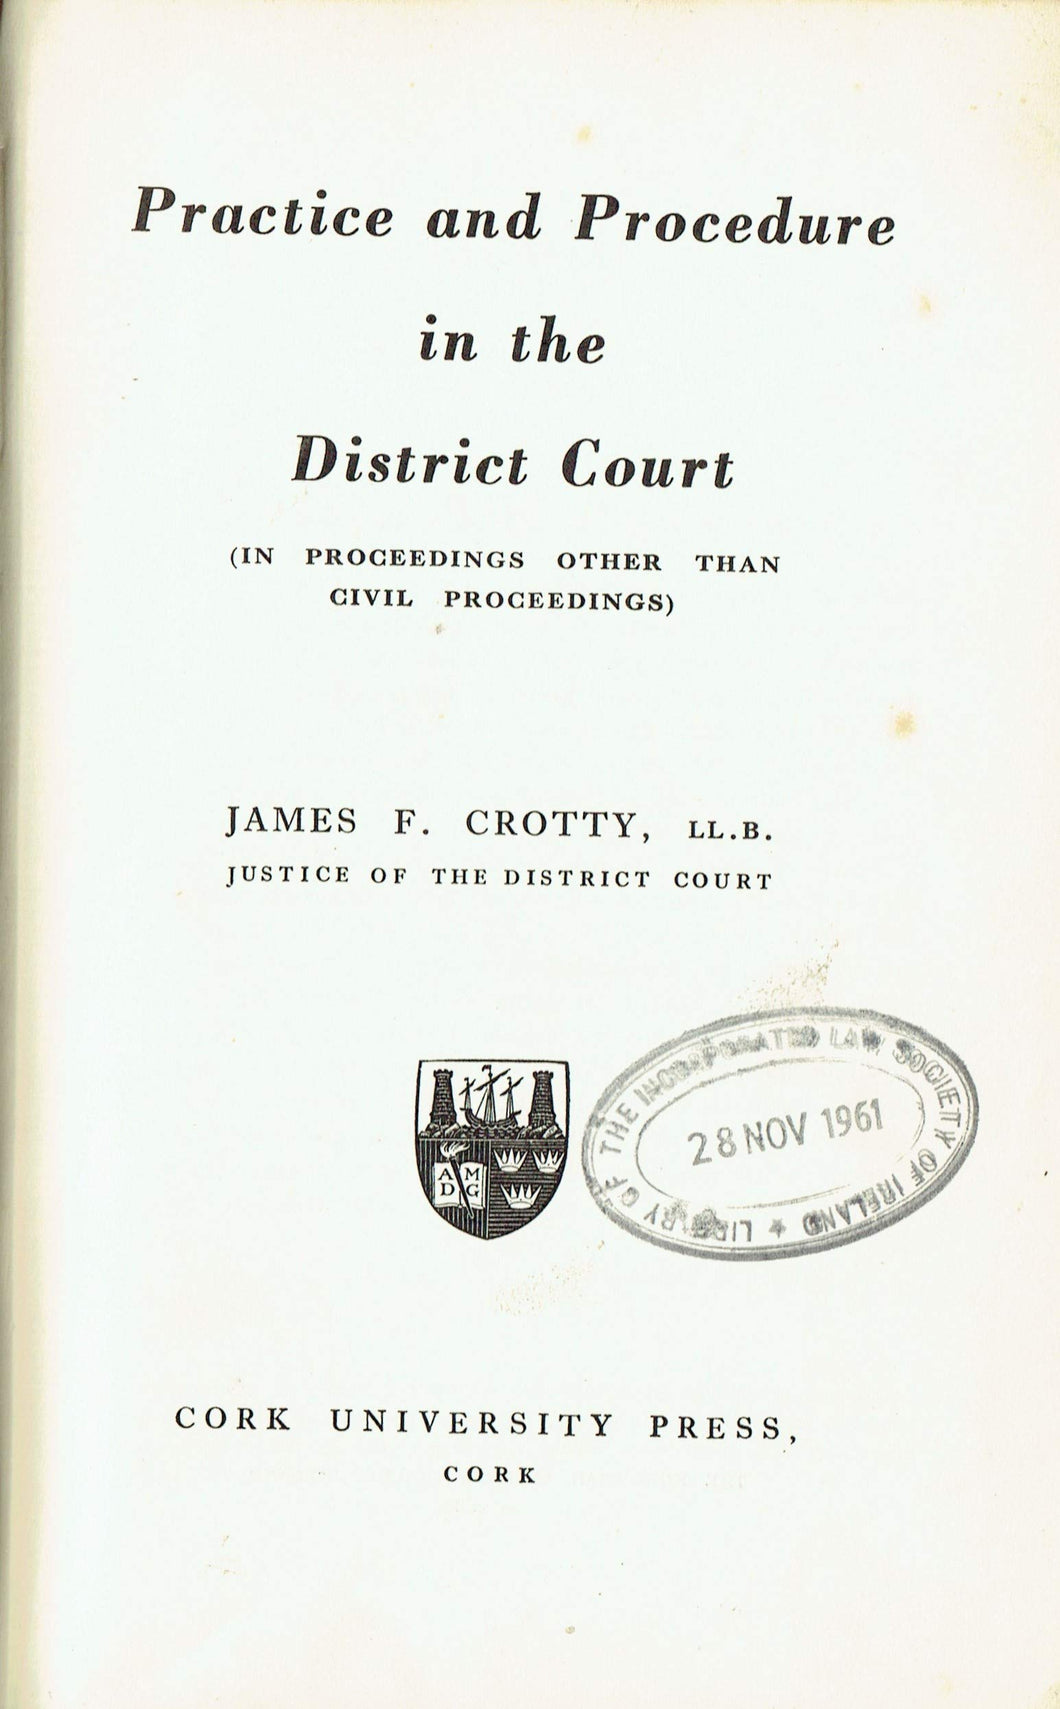 Practice and Procedure in the District Court, in proceedings other than civil proceedings